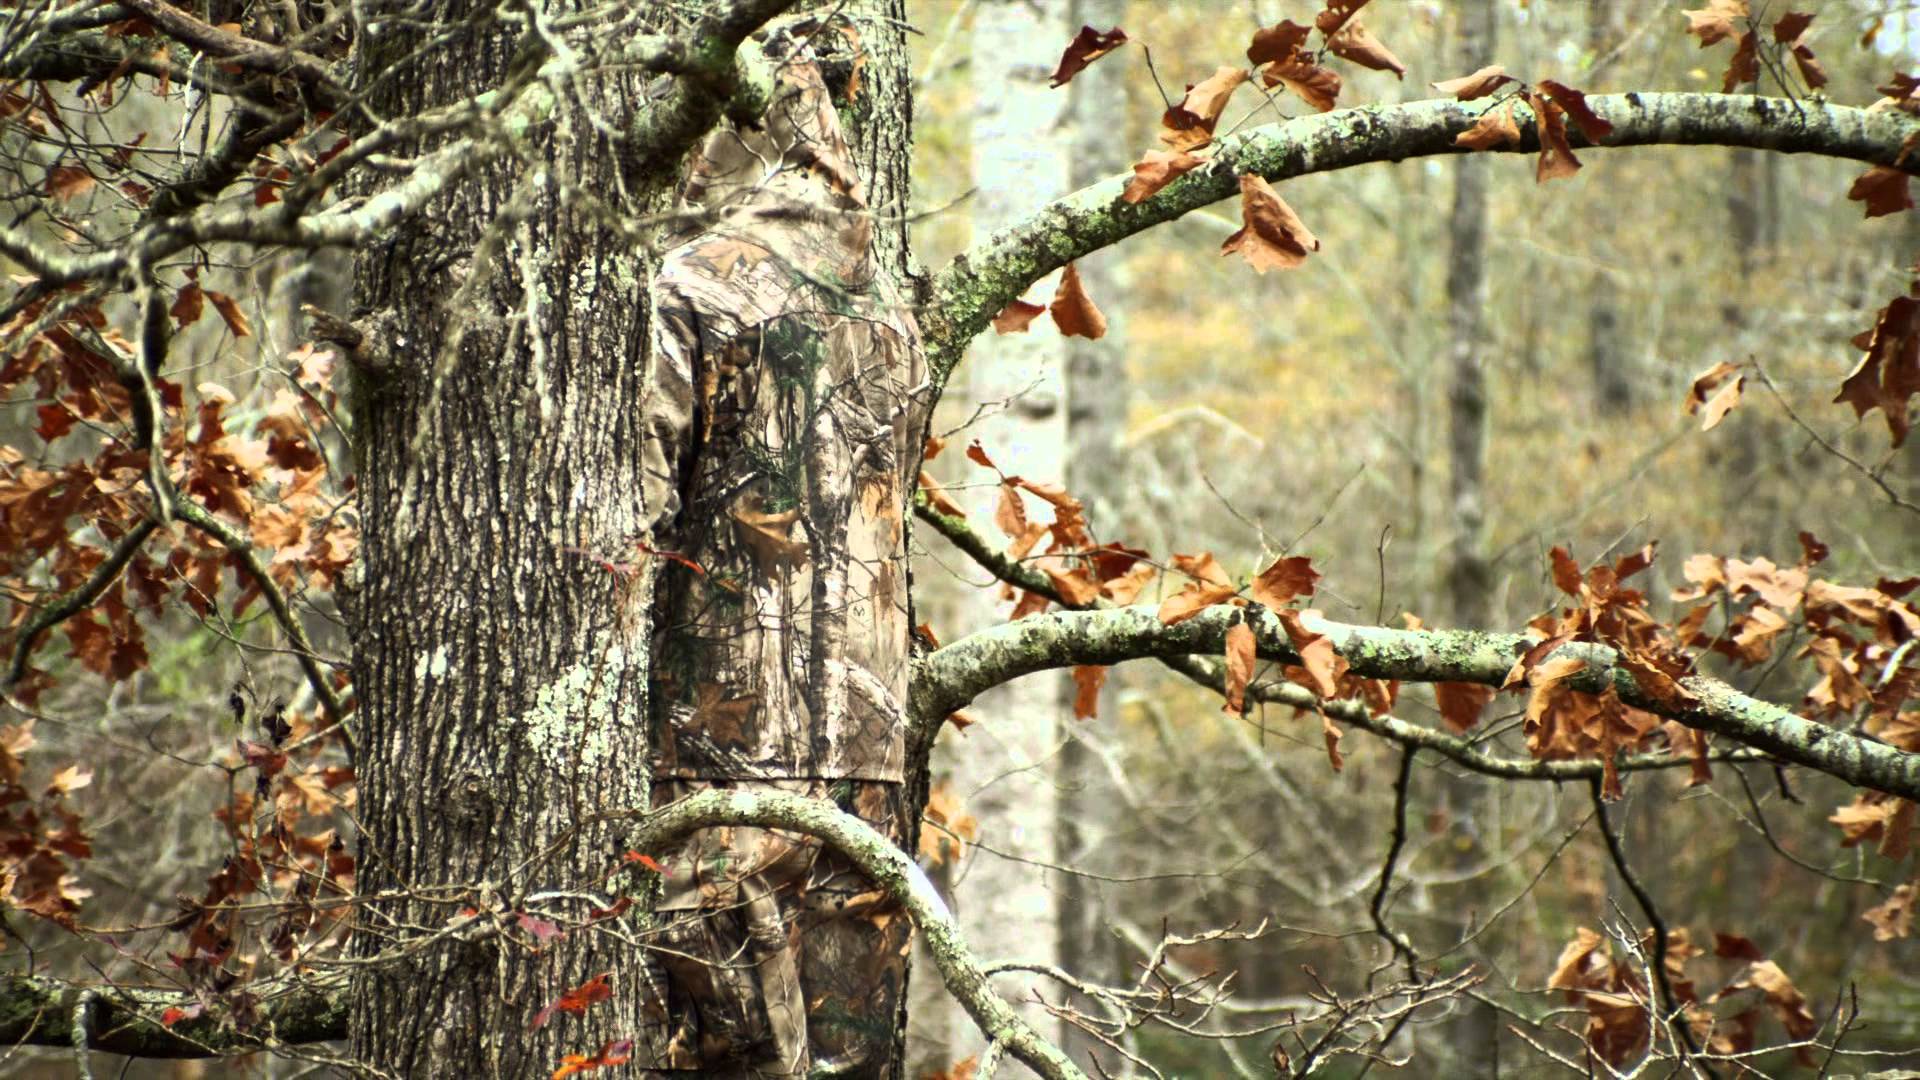 Realtree Camo Iphone Backgrounds Real camouflage wallpaper